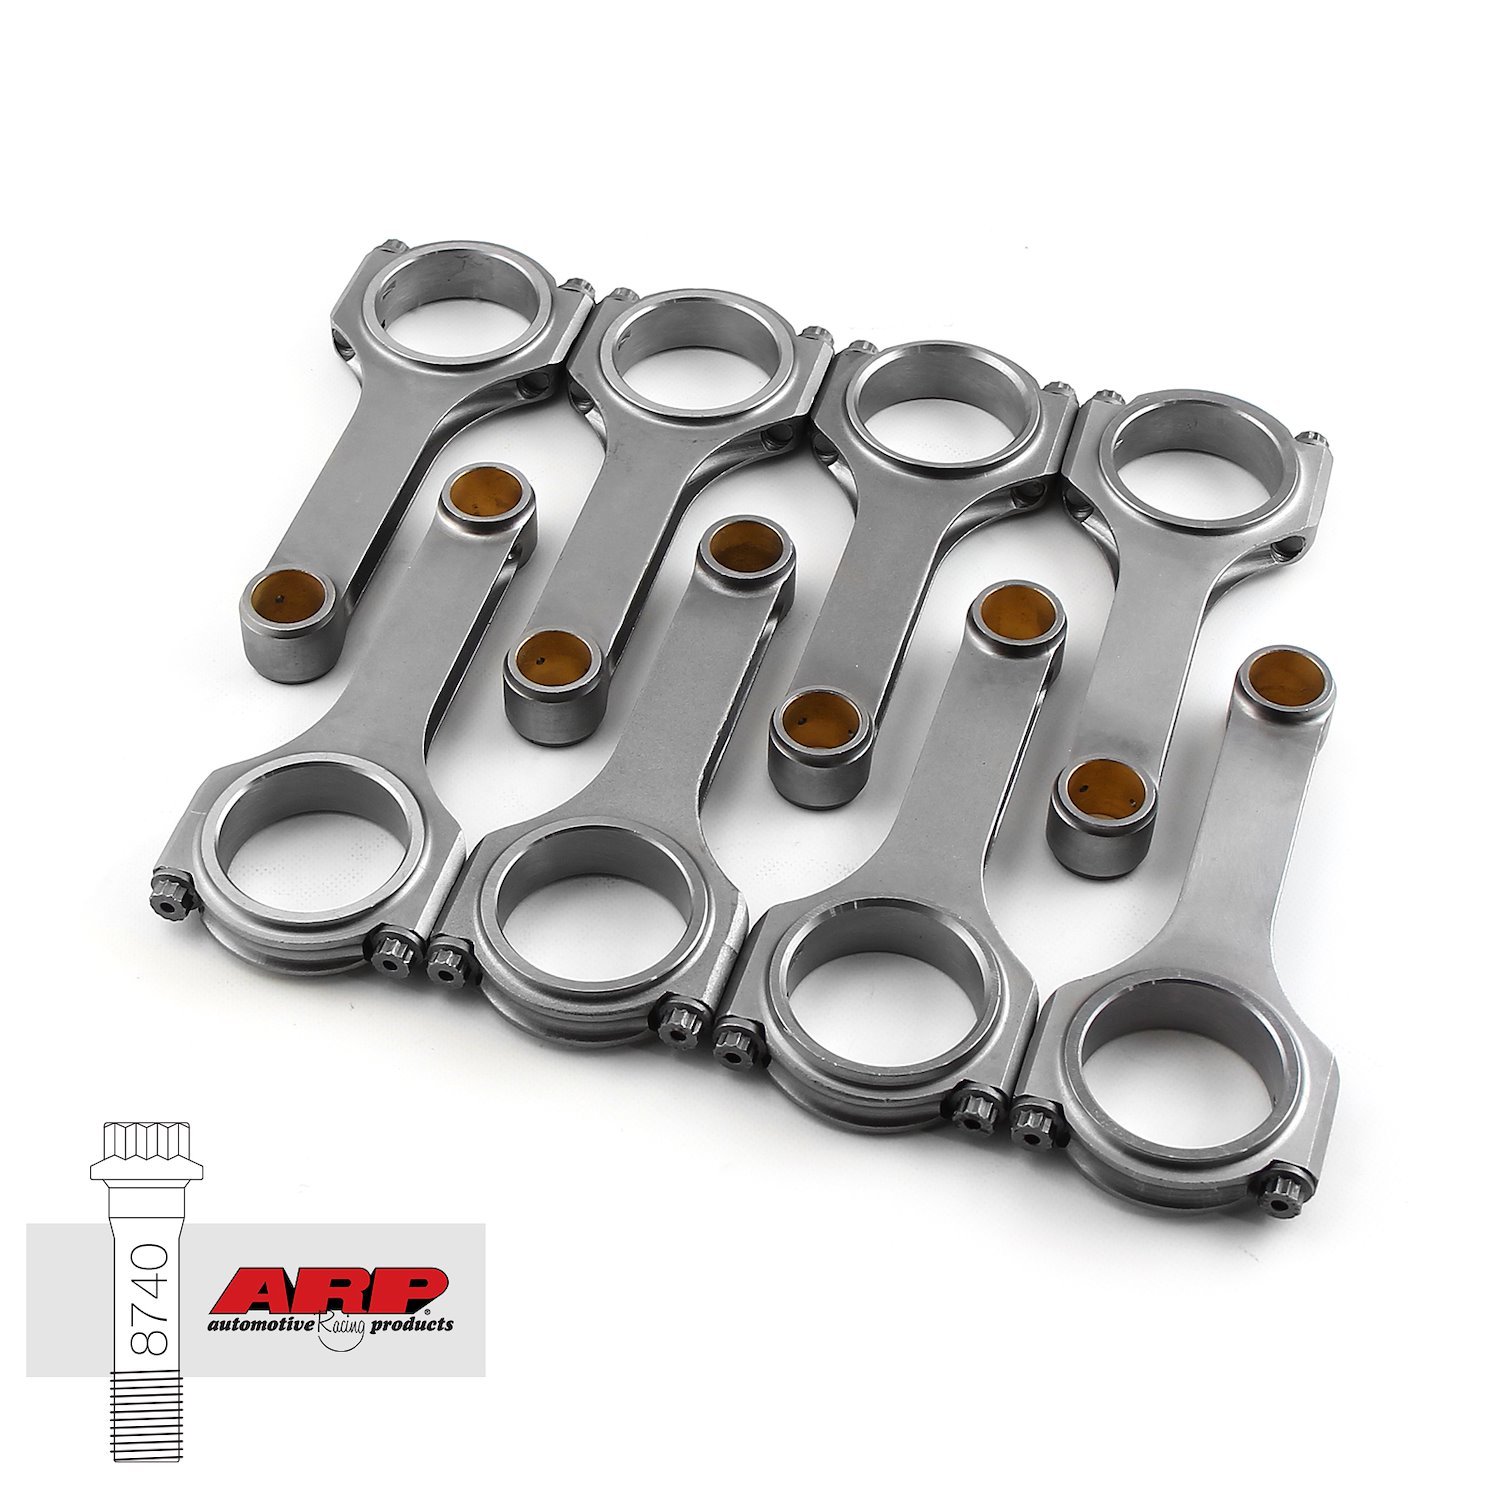 H BEAM 5.090 2.123 .912 4340 CONNECTING RODS